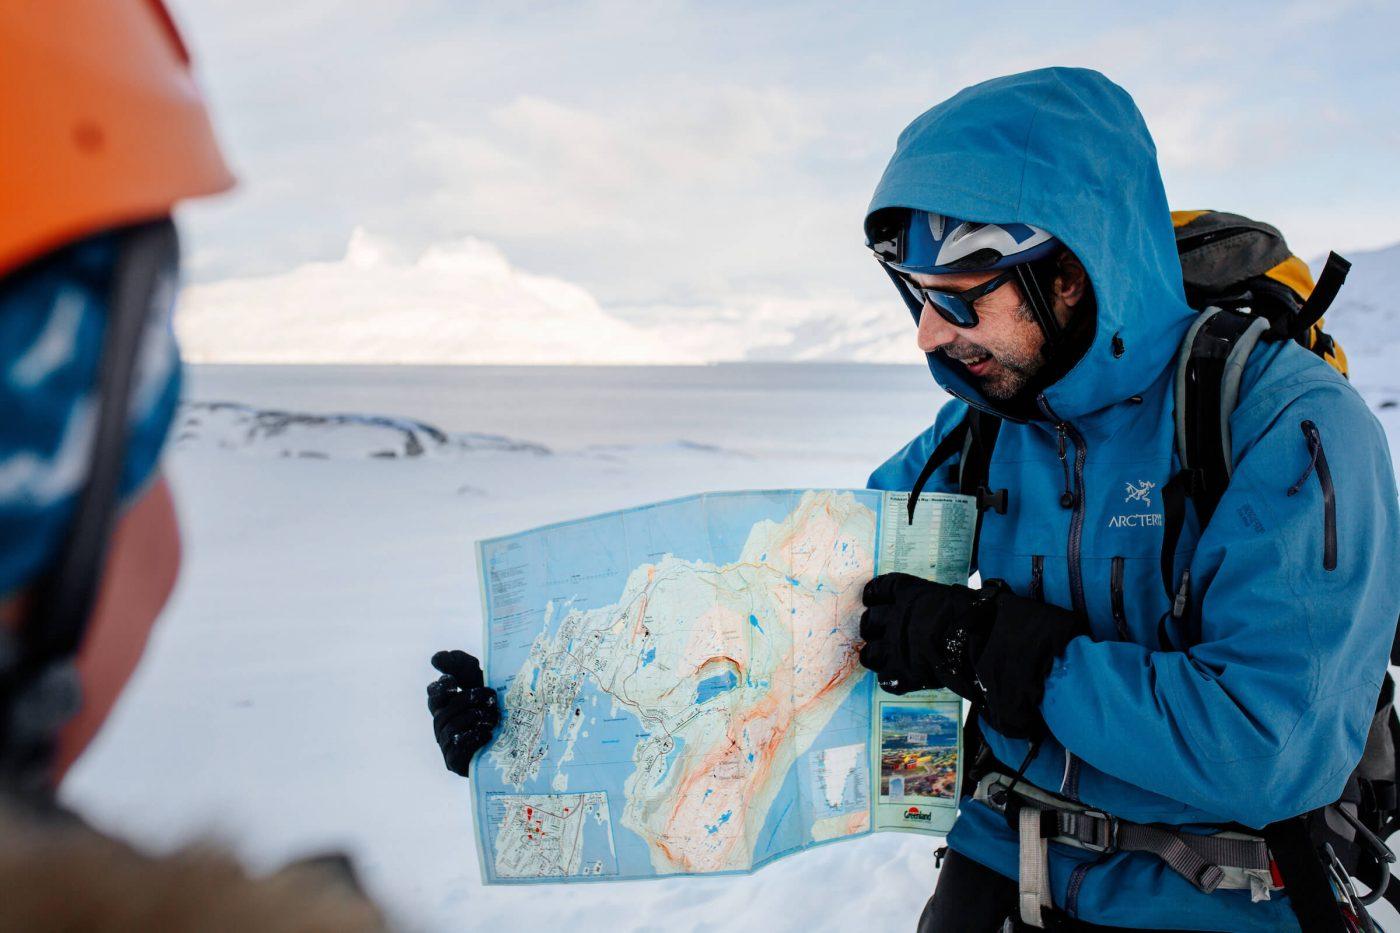 Mountain guide Marc Carreras showing hike route on Nuuk map in Greenland. By Rebecca Gustafsson